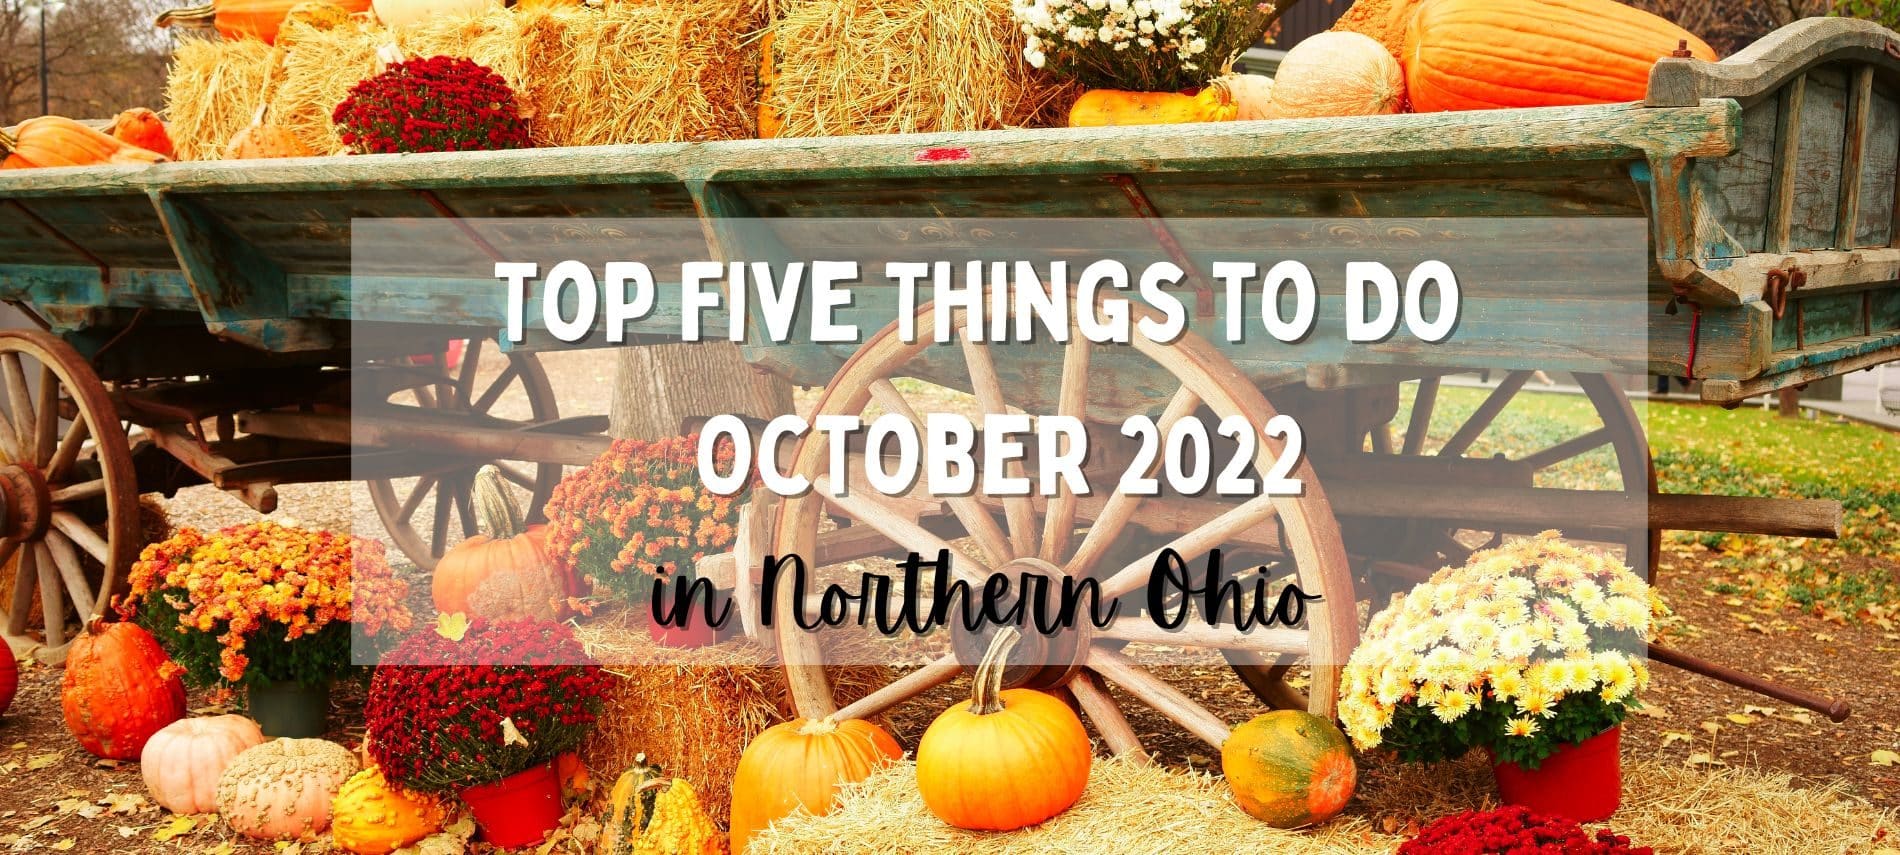 Pumkins, grourds and fall flowers in orange, bunr umber, yellow and brown on a farm wagon with text: Top Five Things to Do October 2022 in Northern Ohio